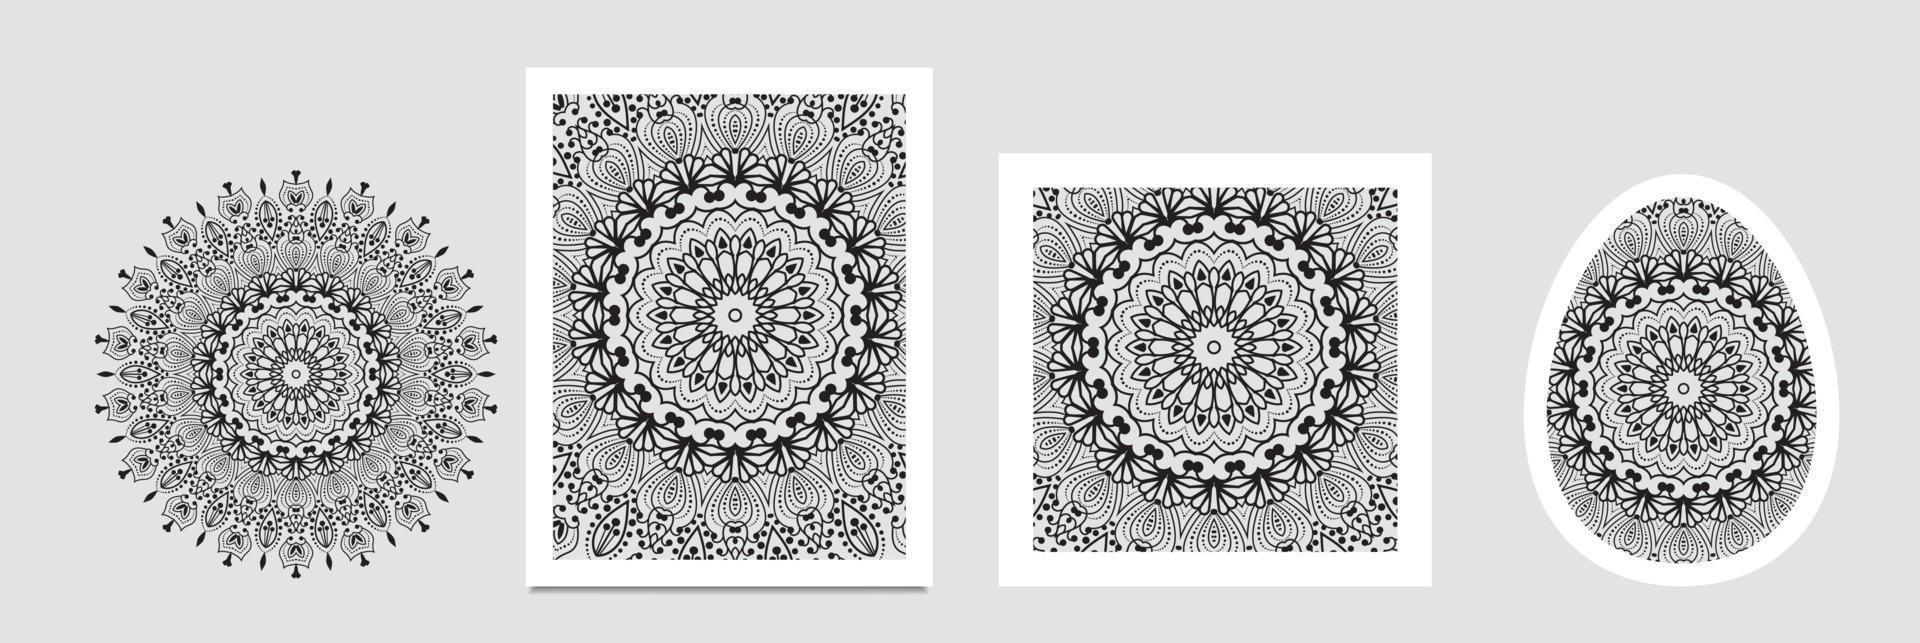 Luxury mandala background for book cover, wedding invitation, or other project vector